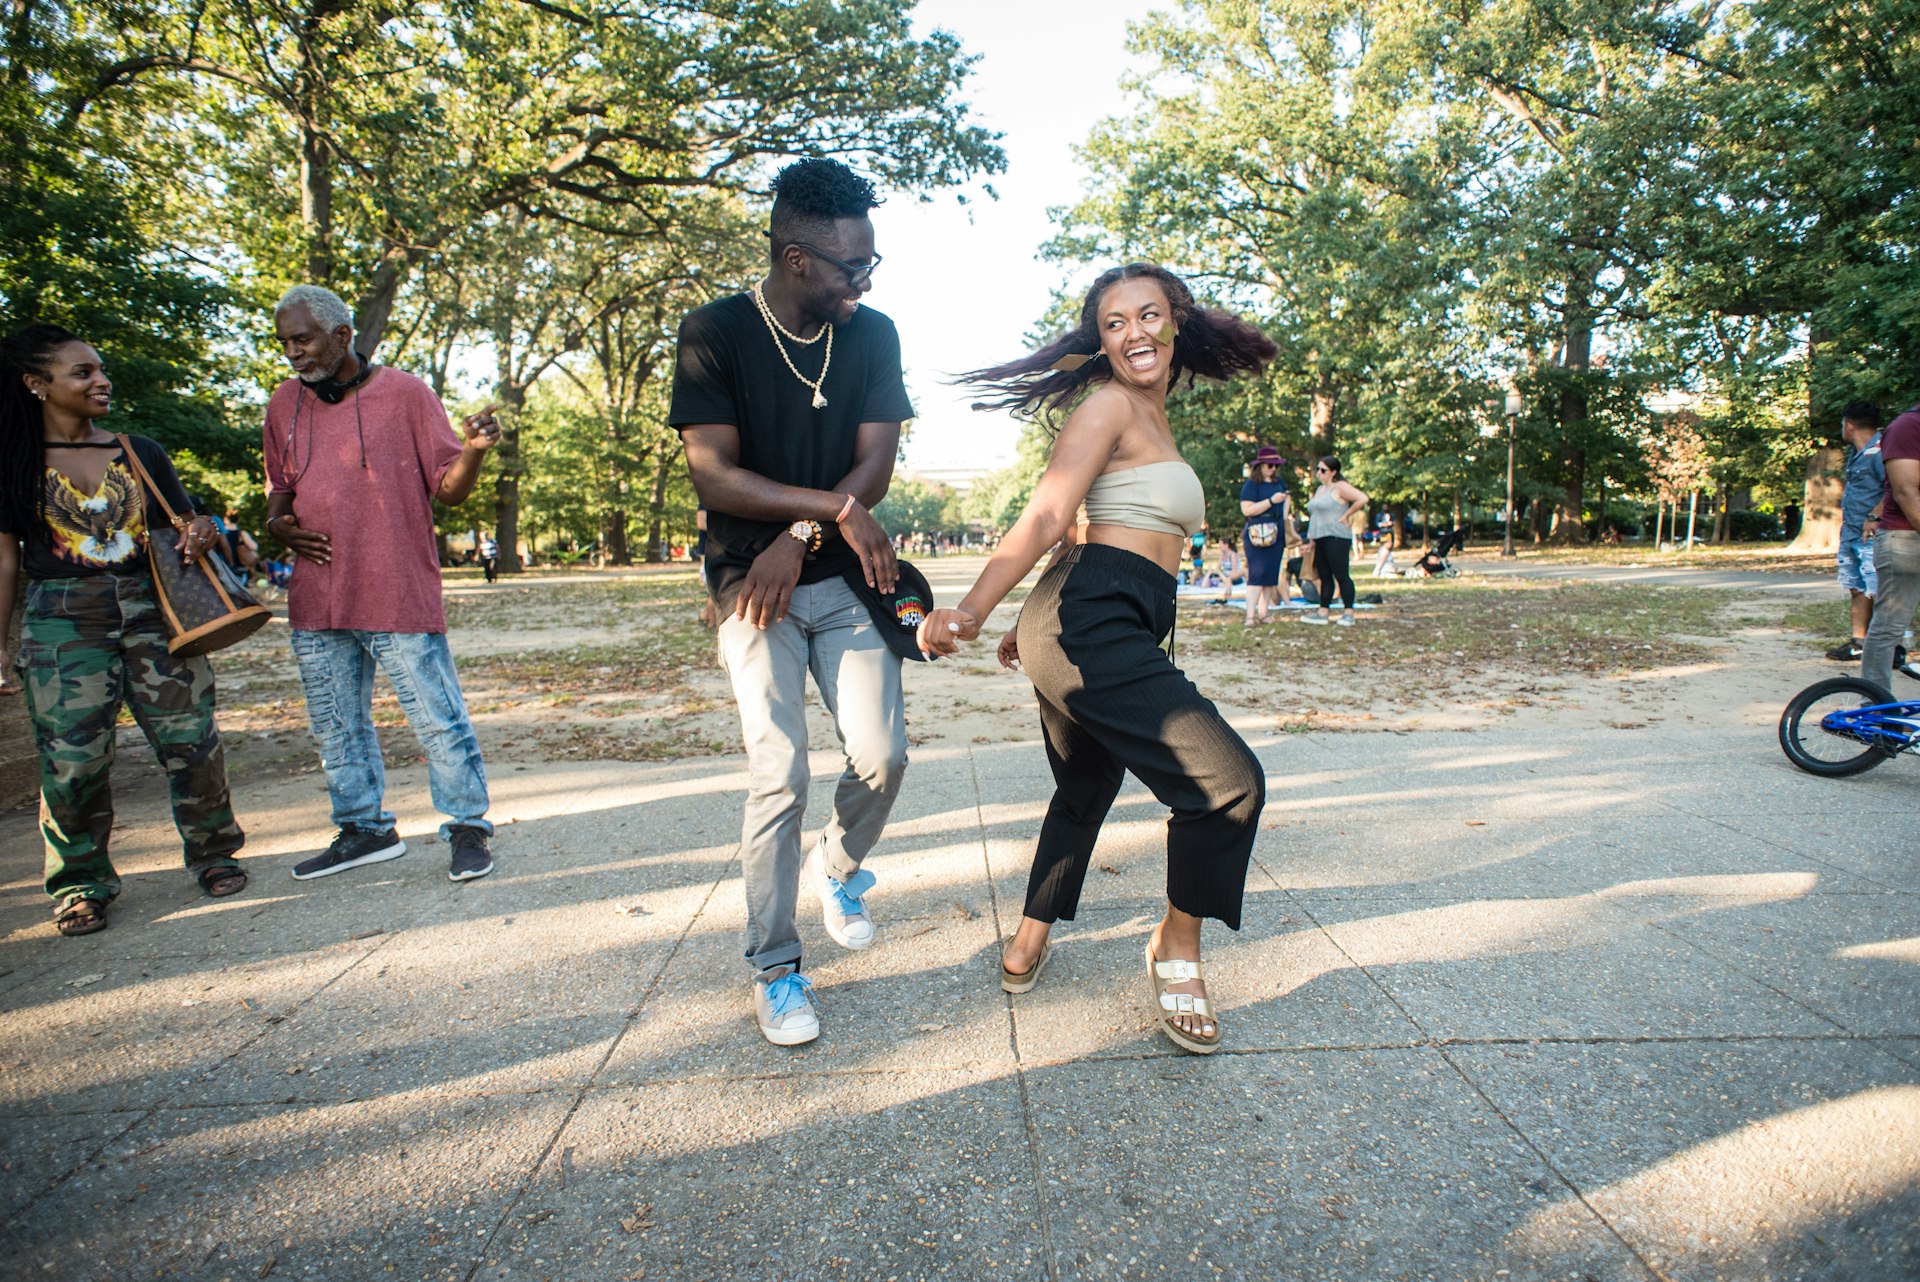 Two people smile and dance in the park